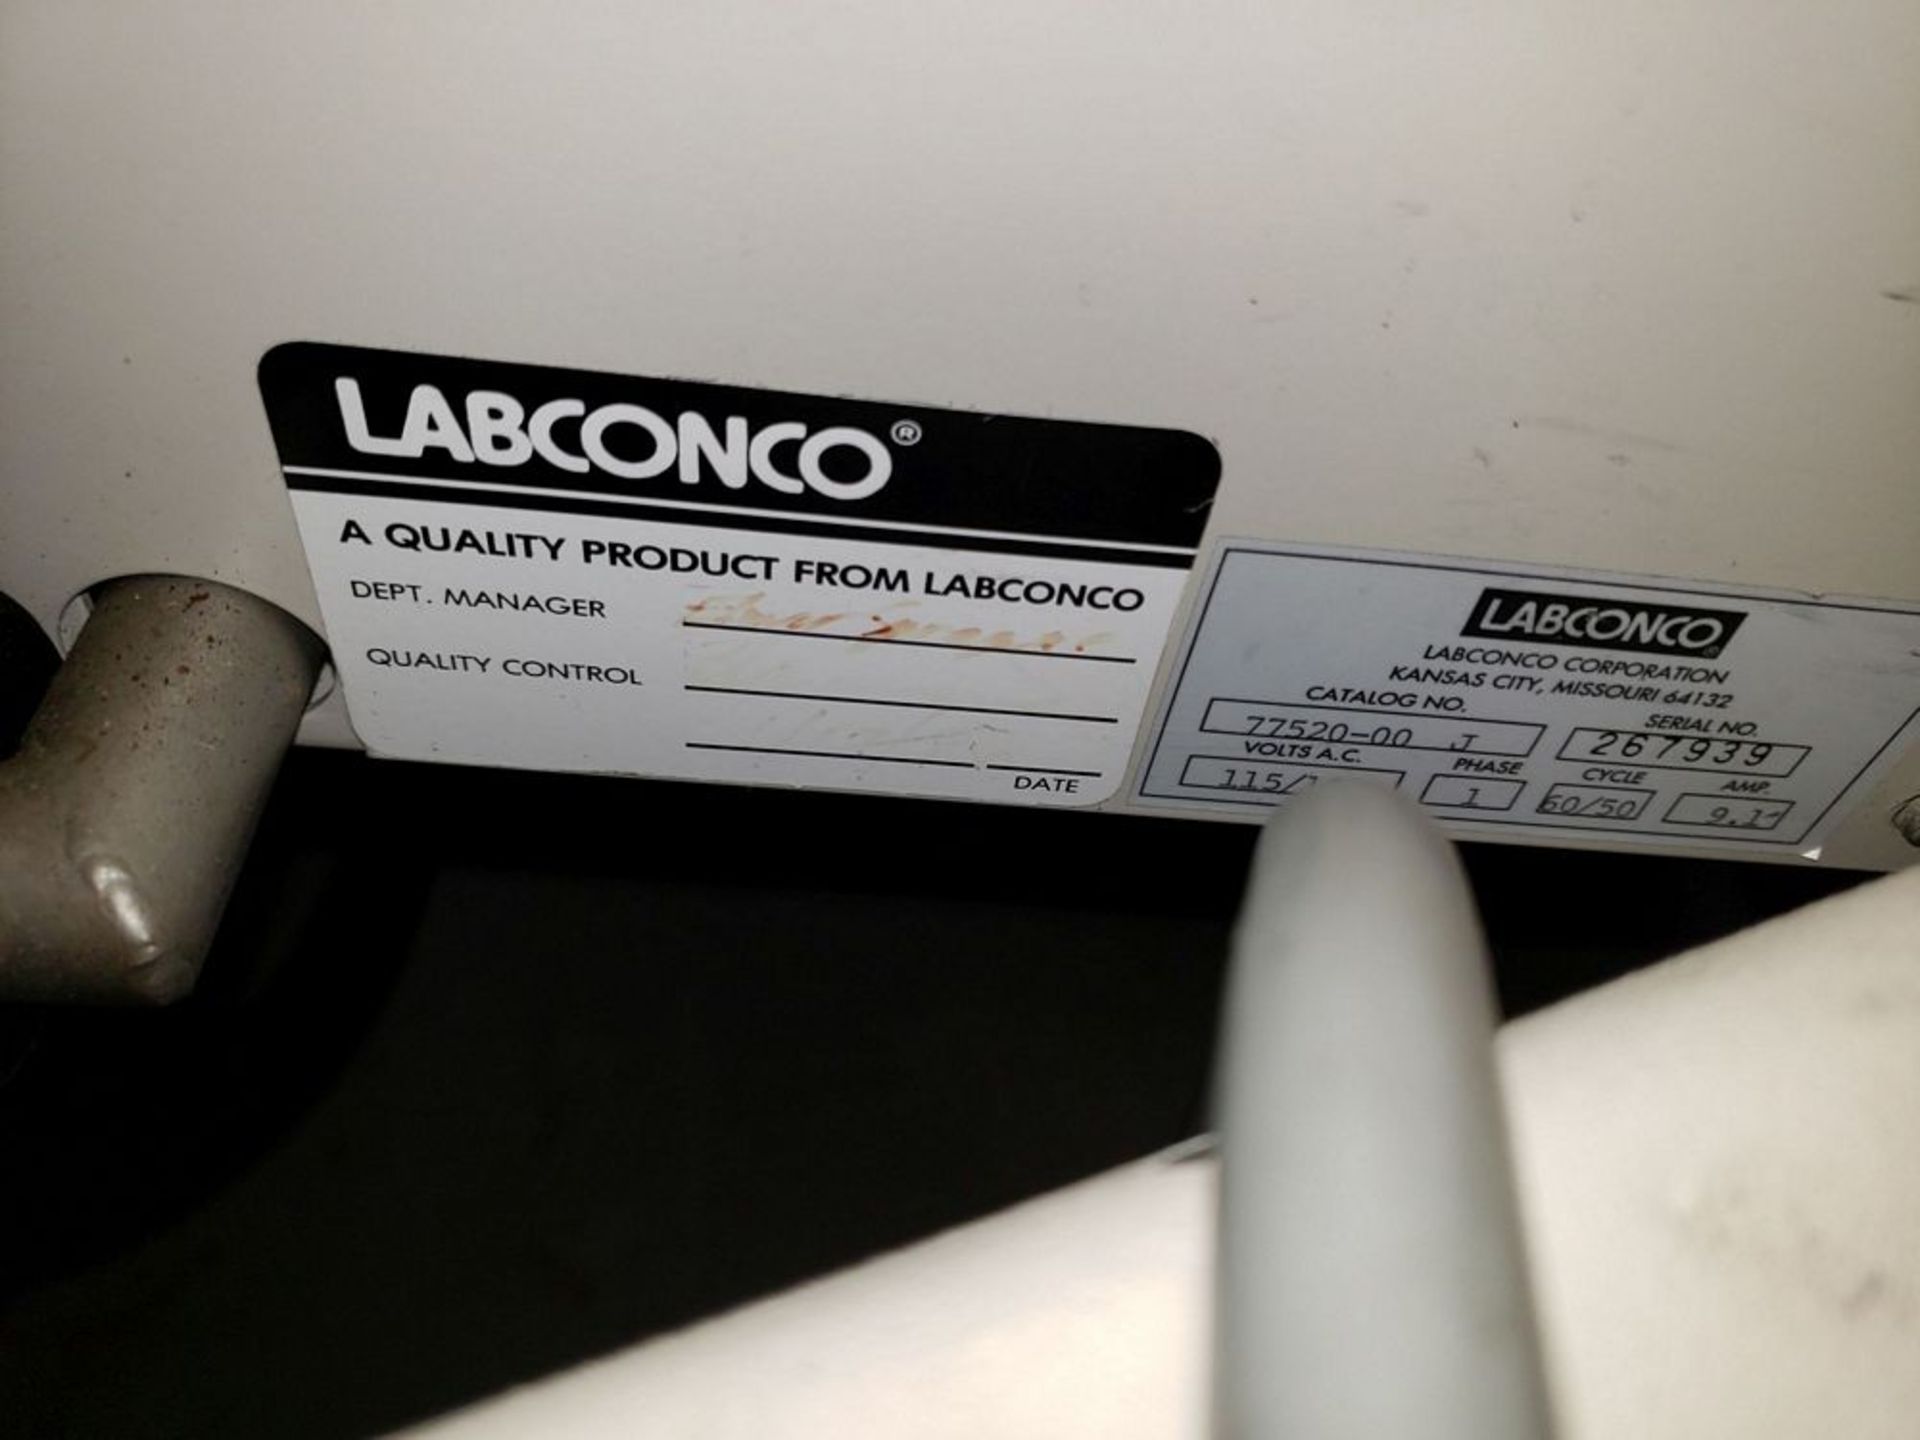 Labconco freeze dryer, cat# 77520-00J, 20 head, 115 volt on stand, serial# 267939. - Image 9 of 10